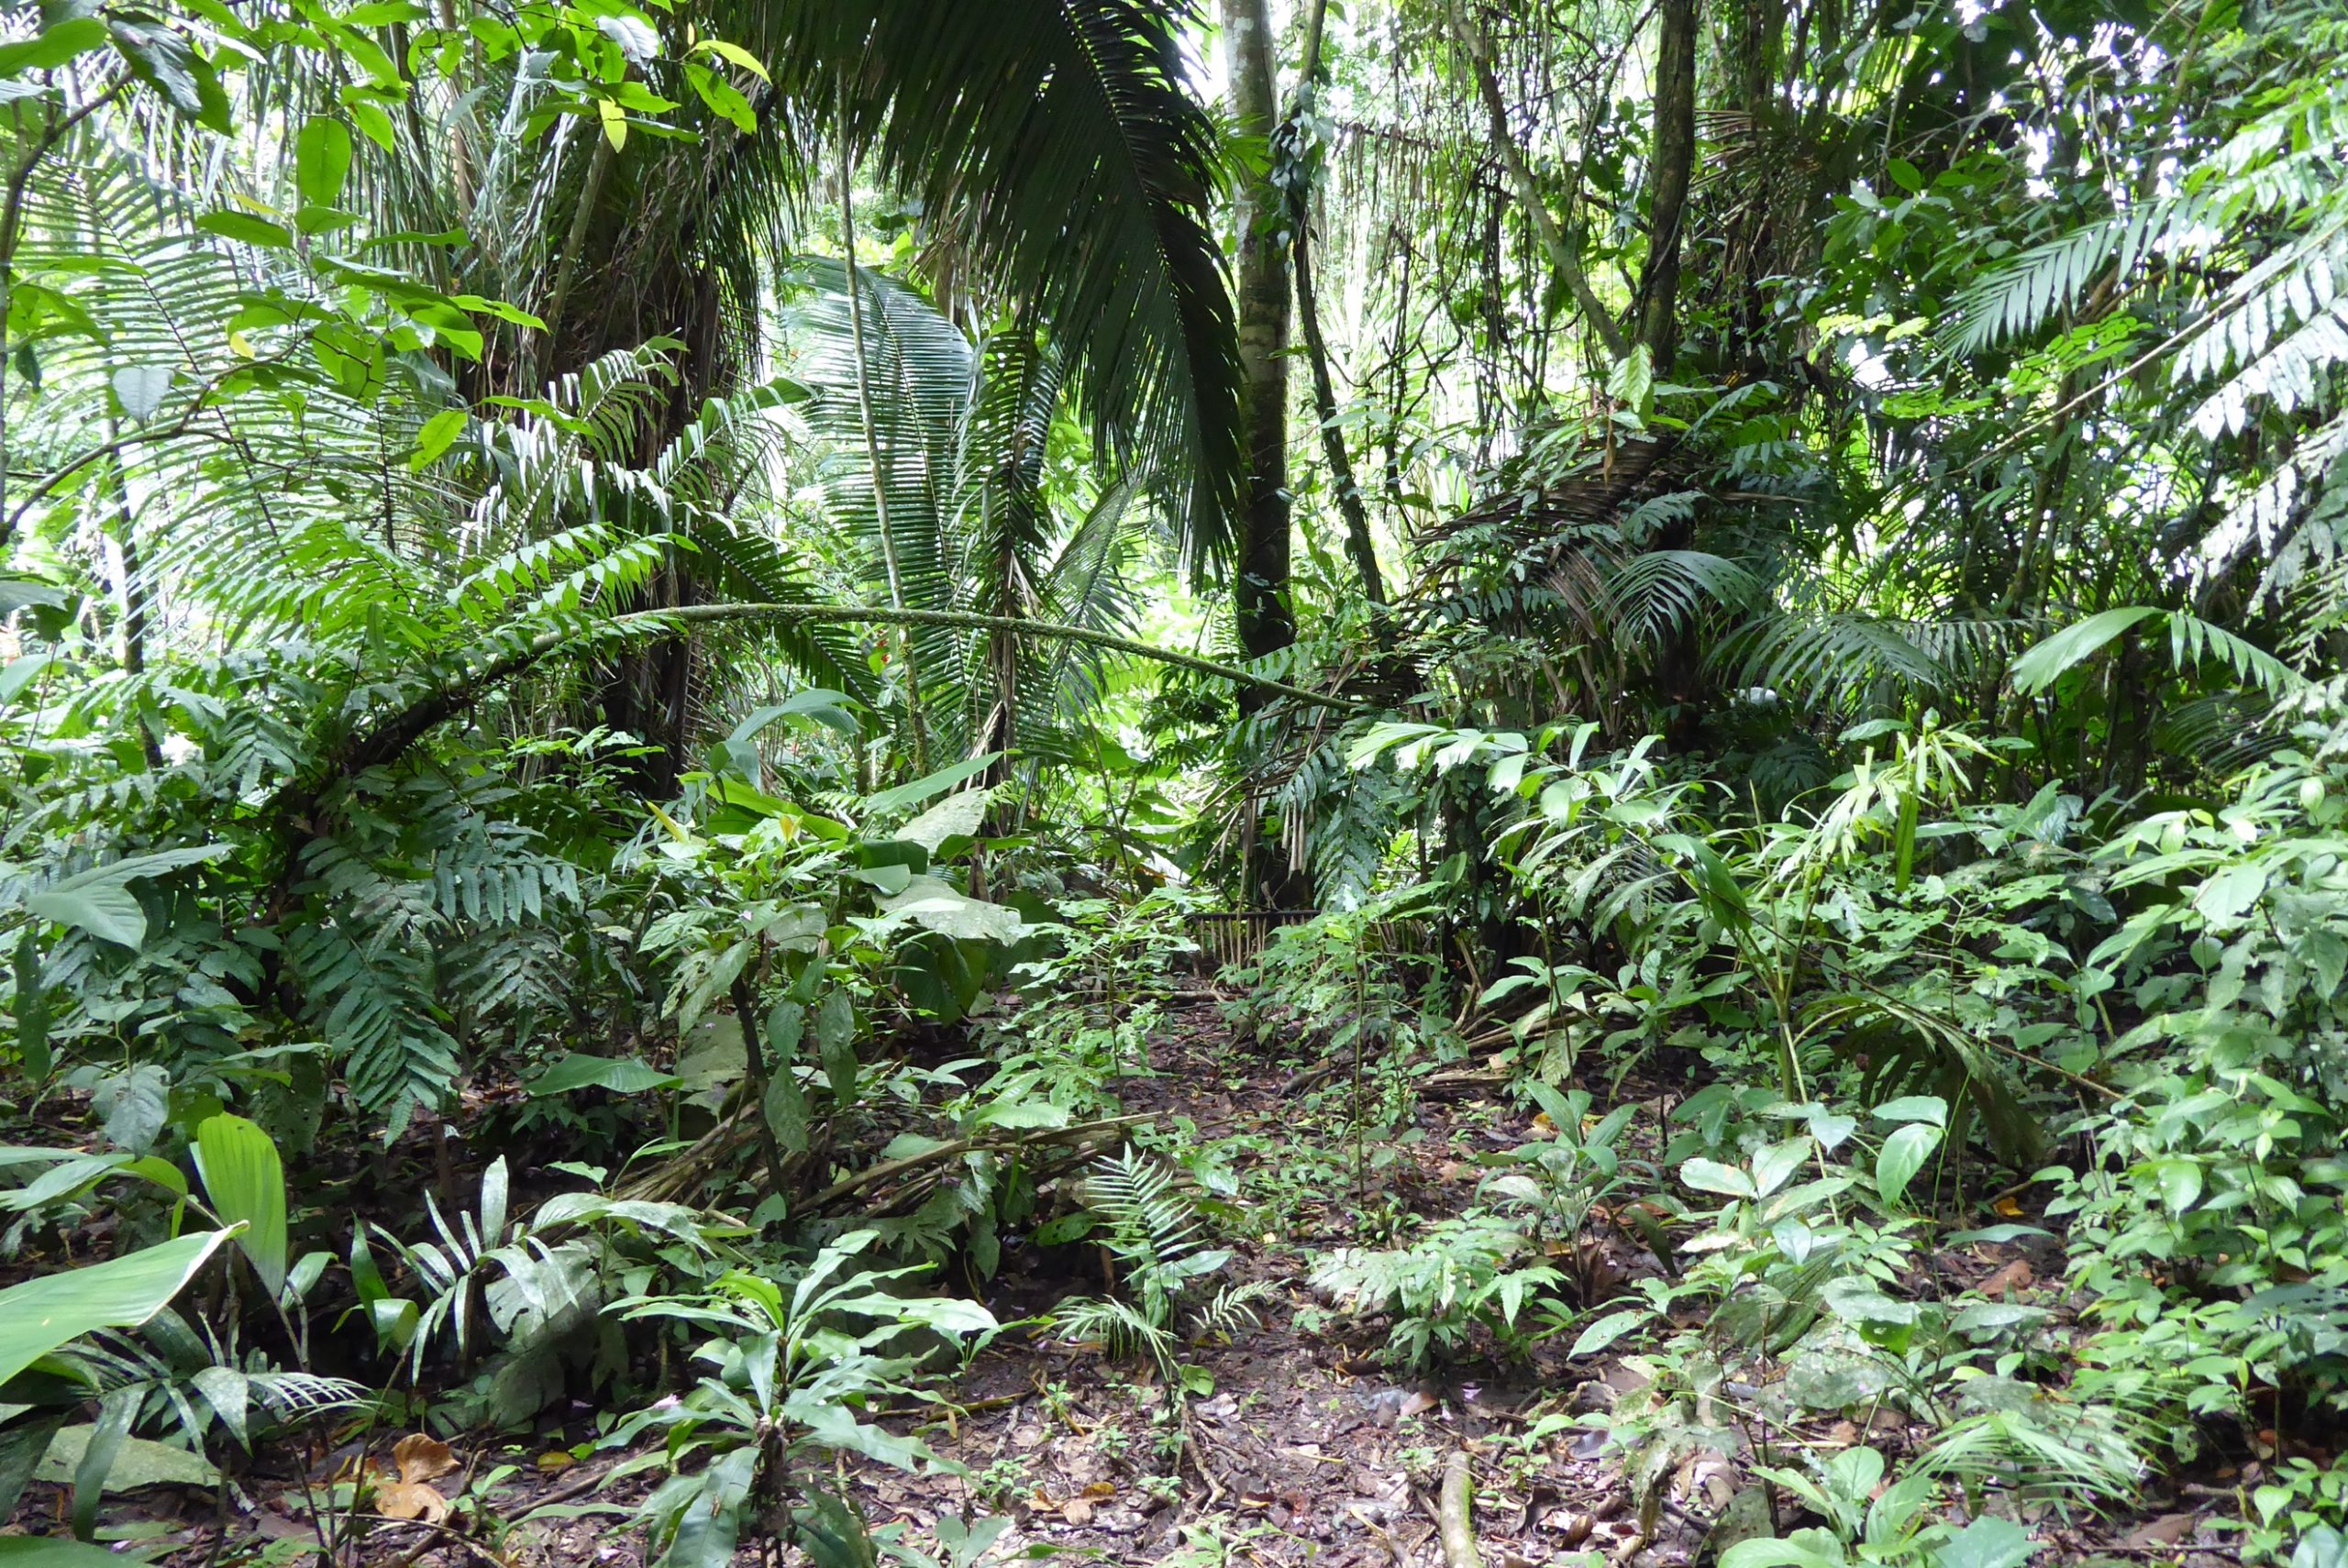 Photograph of trees in a unmanaged forest, Peruvian Amazon, with abundant ground vegetation